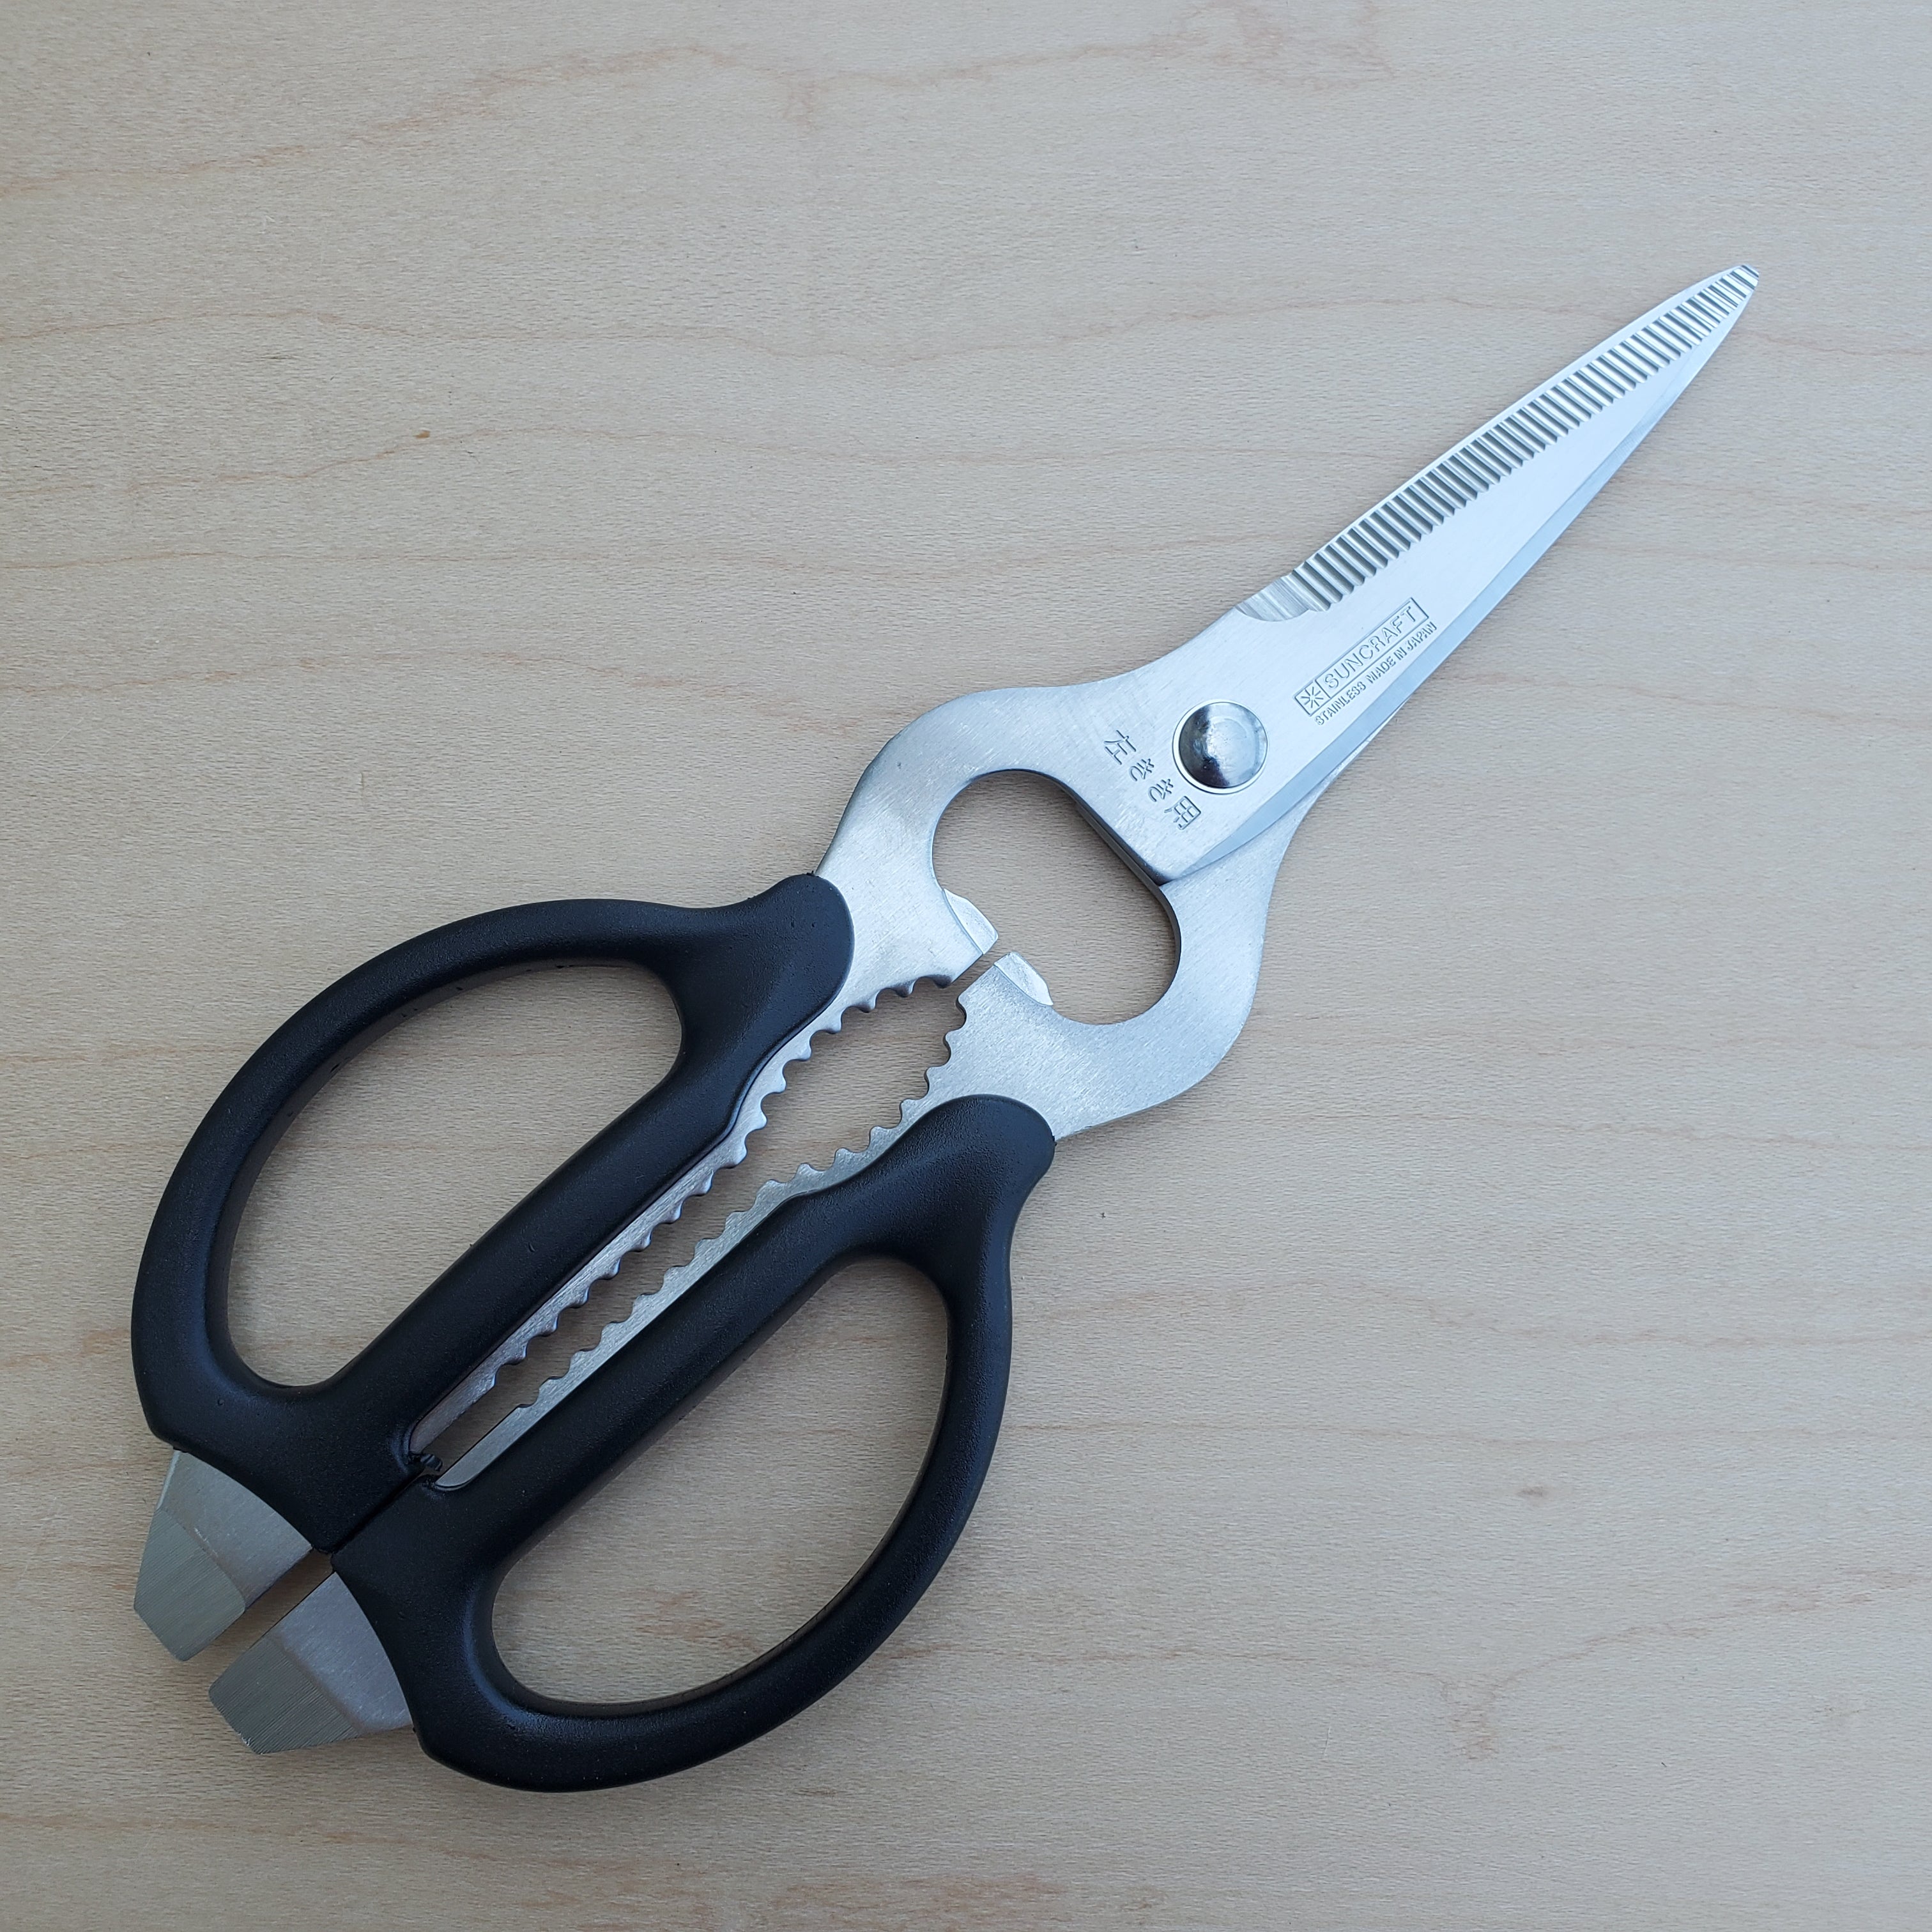 Lefty's Left Handed Kitchen Scissors - Stainless Steel Heavy Duty General  Purpose Shears - Dishwasher Safe Easy to Clean - Ultra Sharp - Great Gift